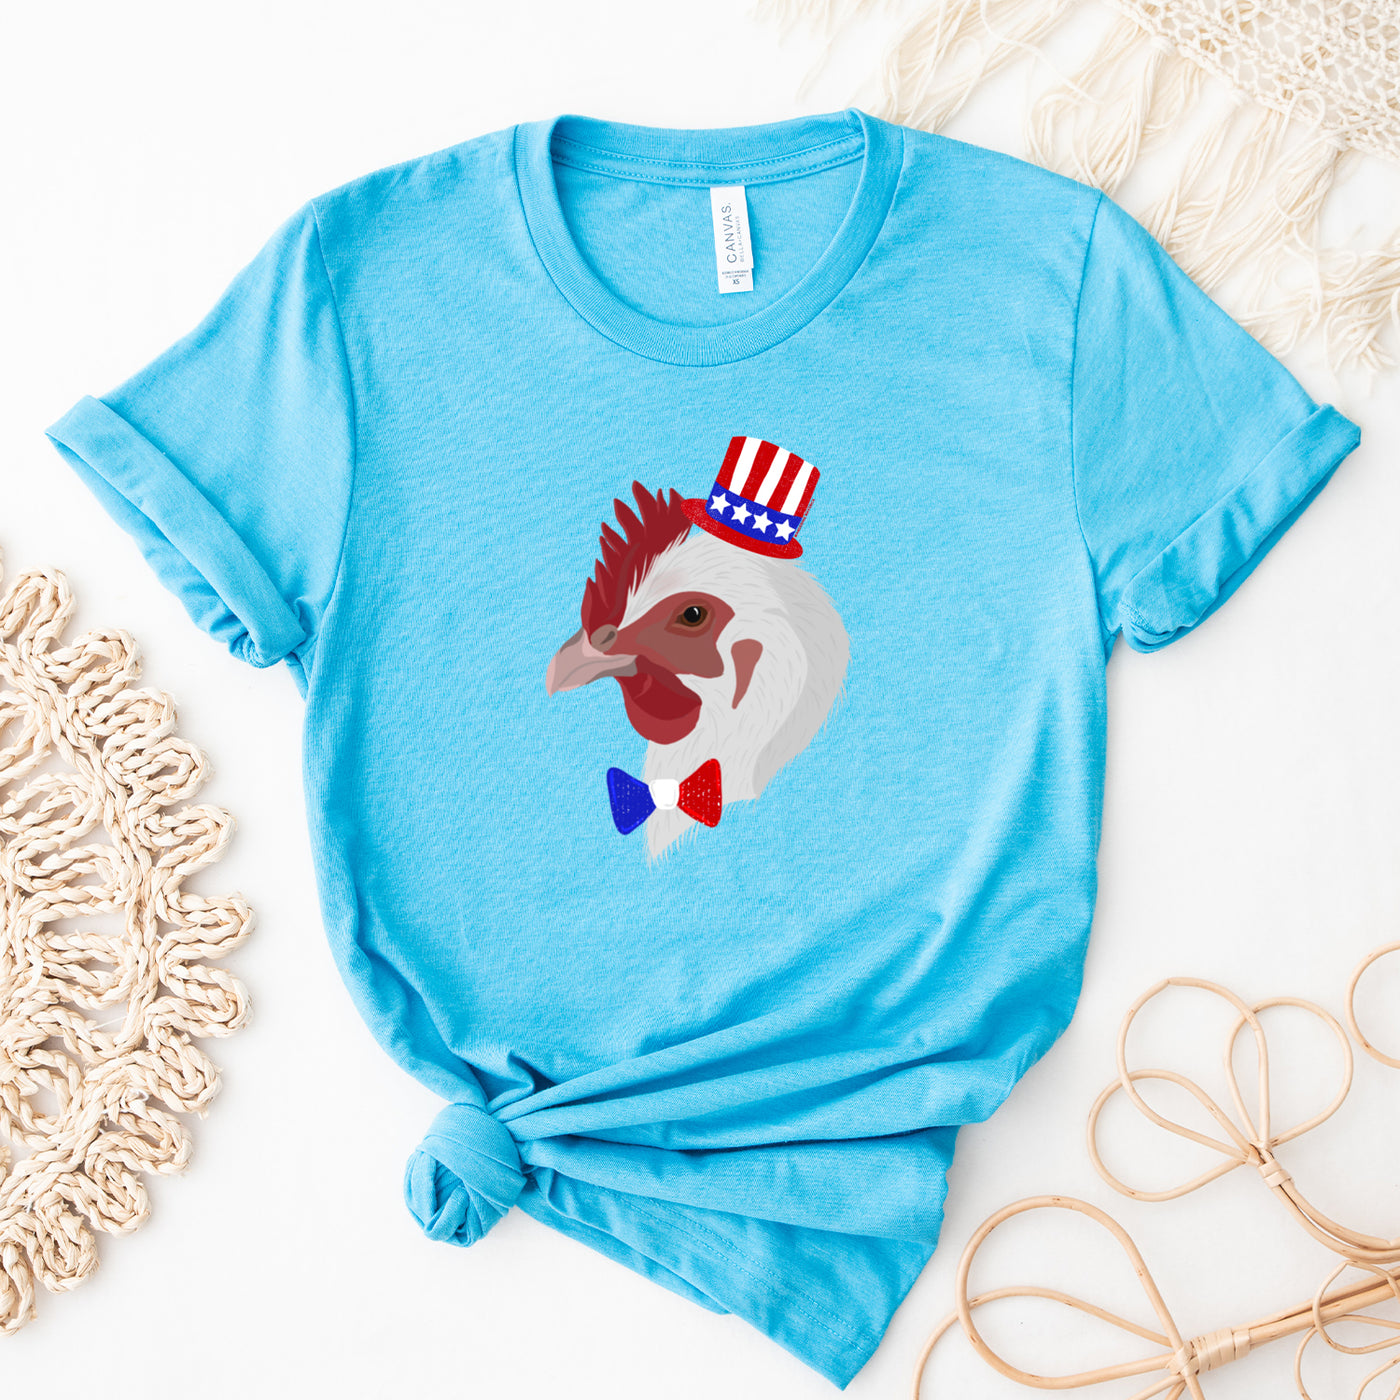 Red, White & Blue Chicken T-Shirt (XS-4XL) - Multiple Colors!